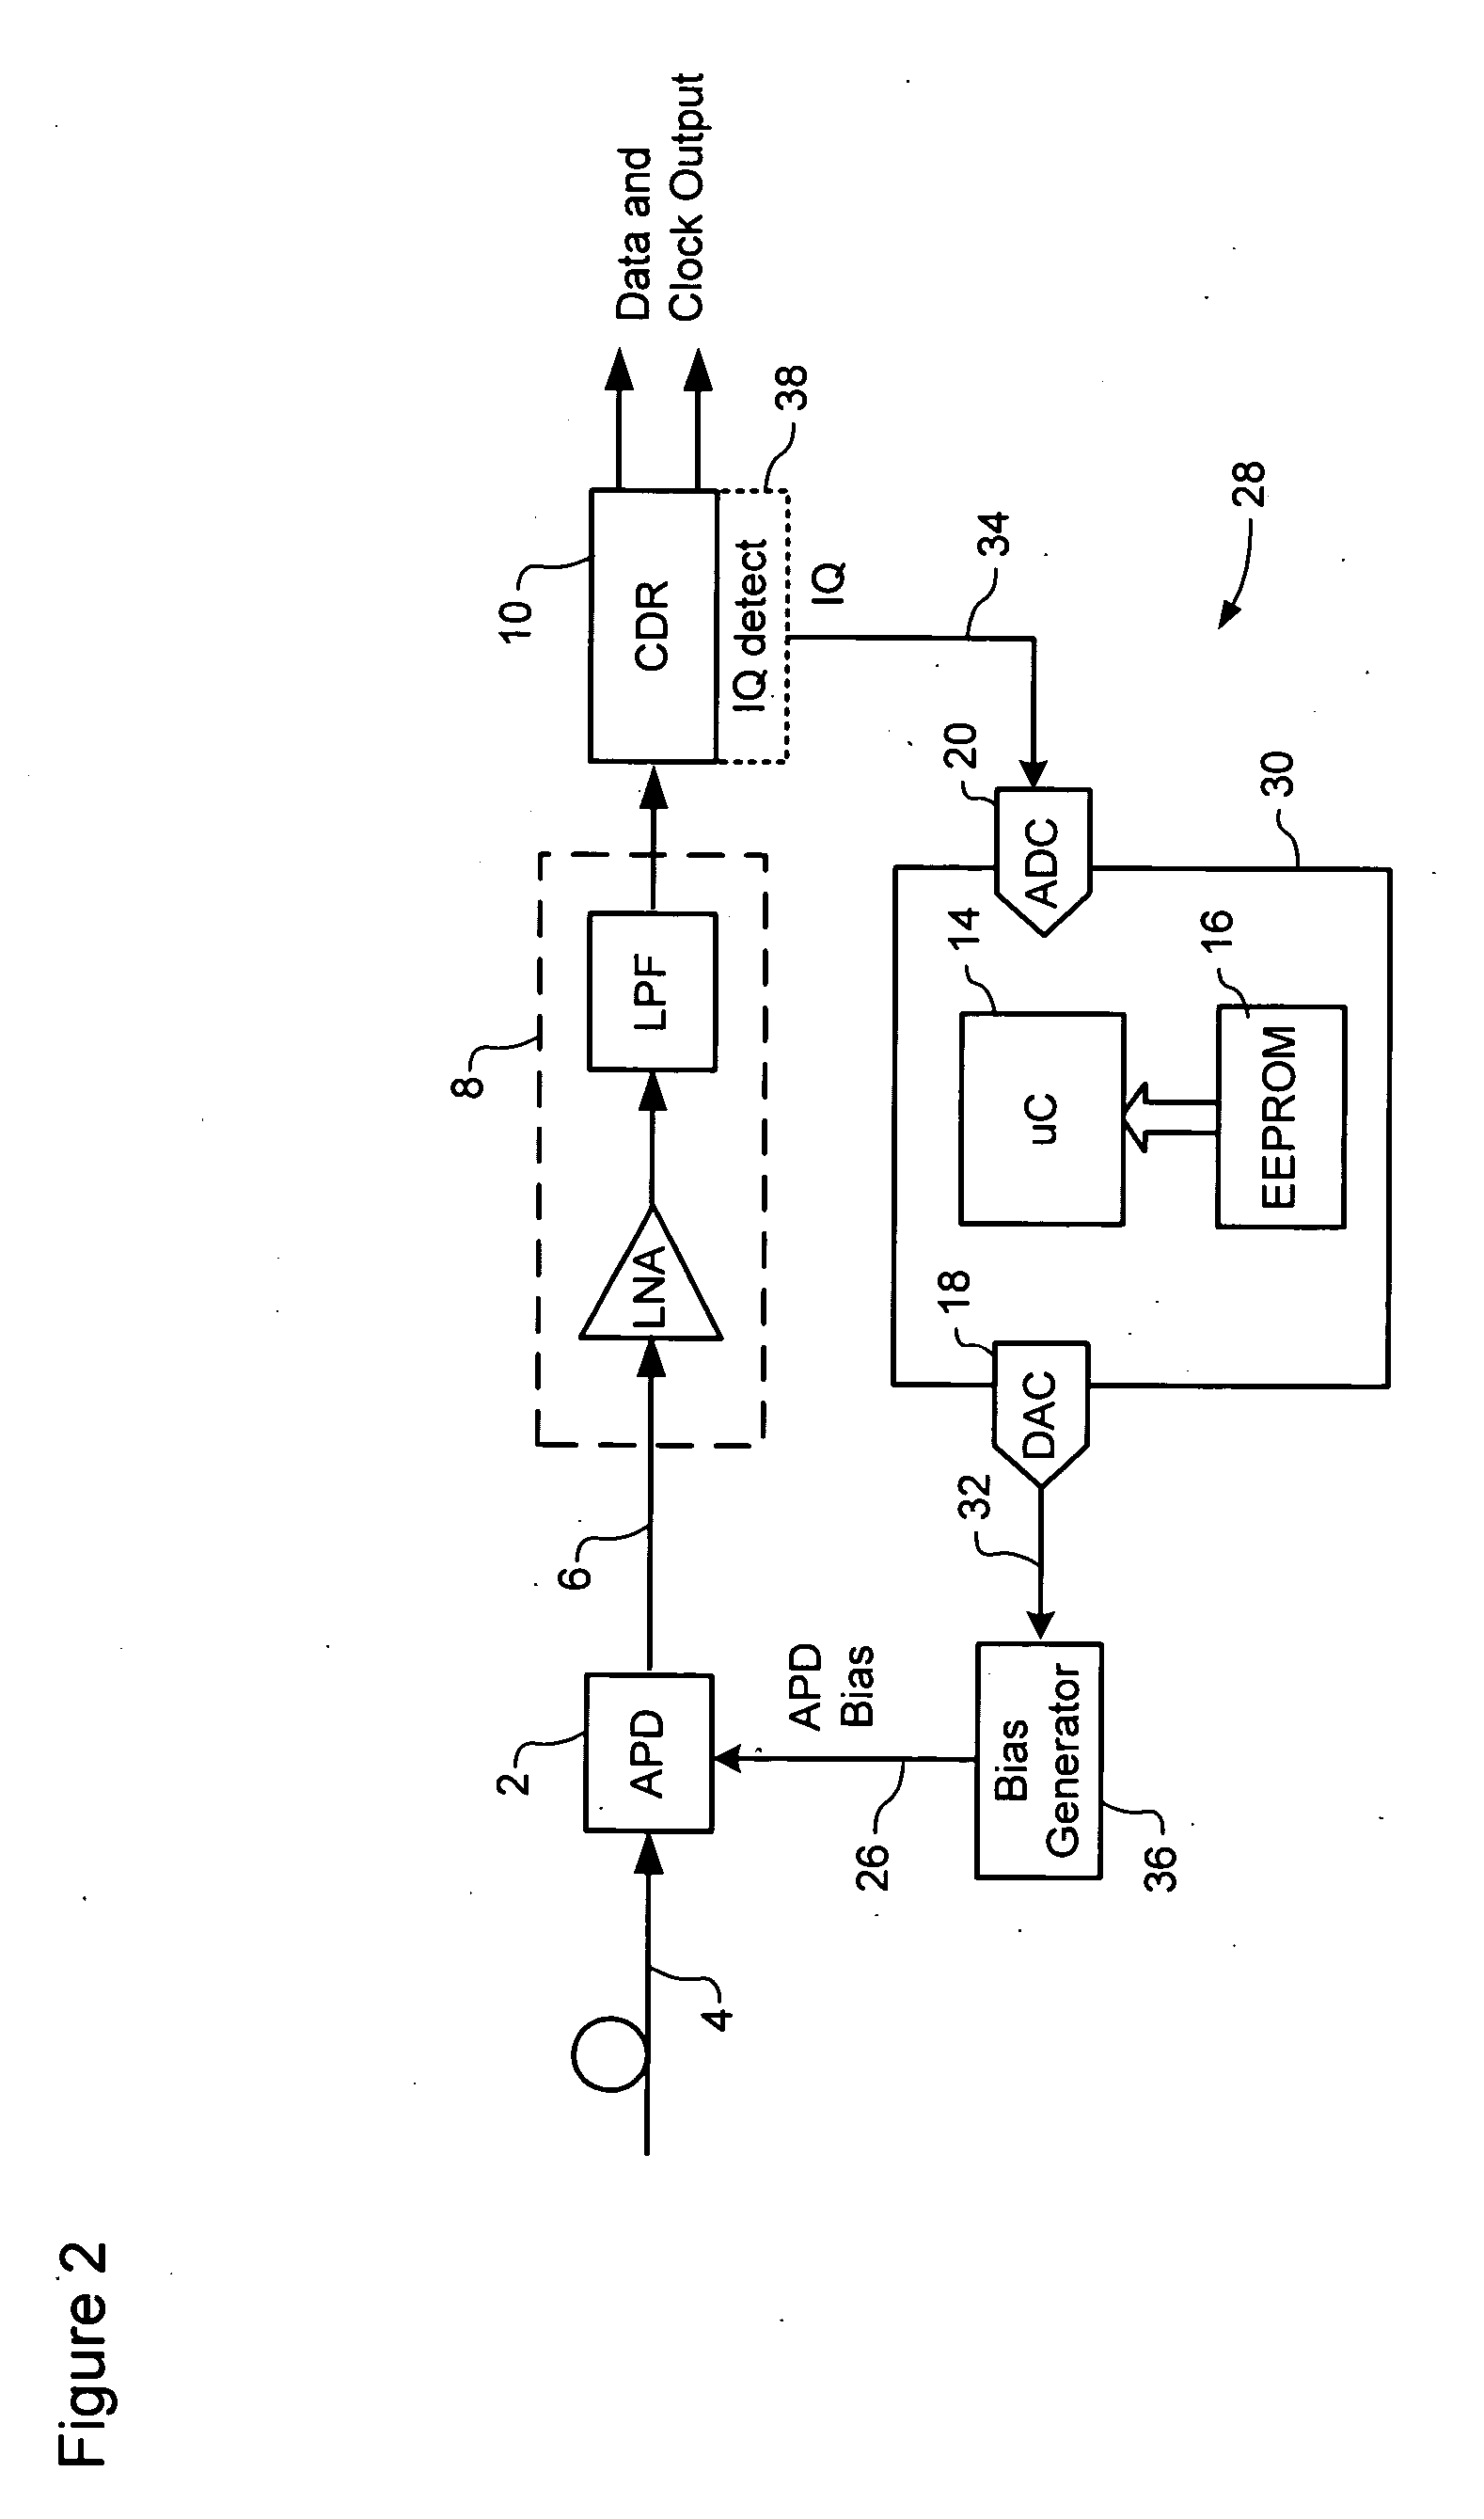 Dynamic control of photodiode bias voltage